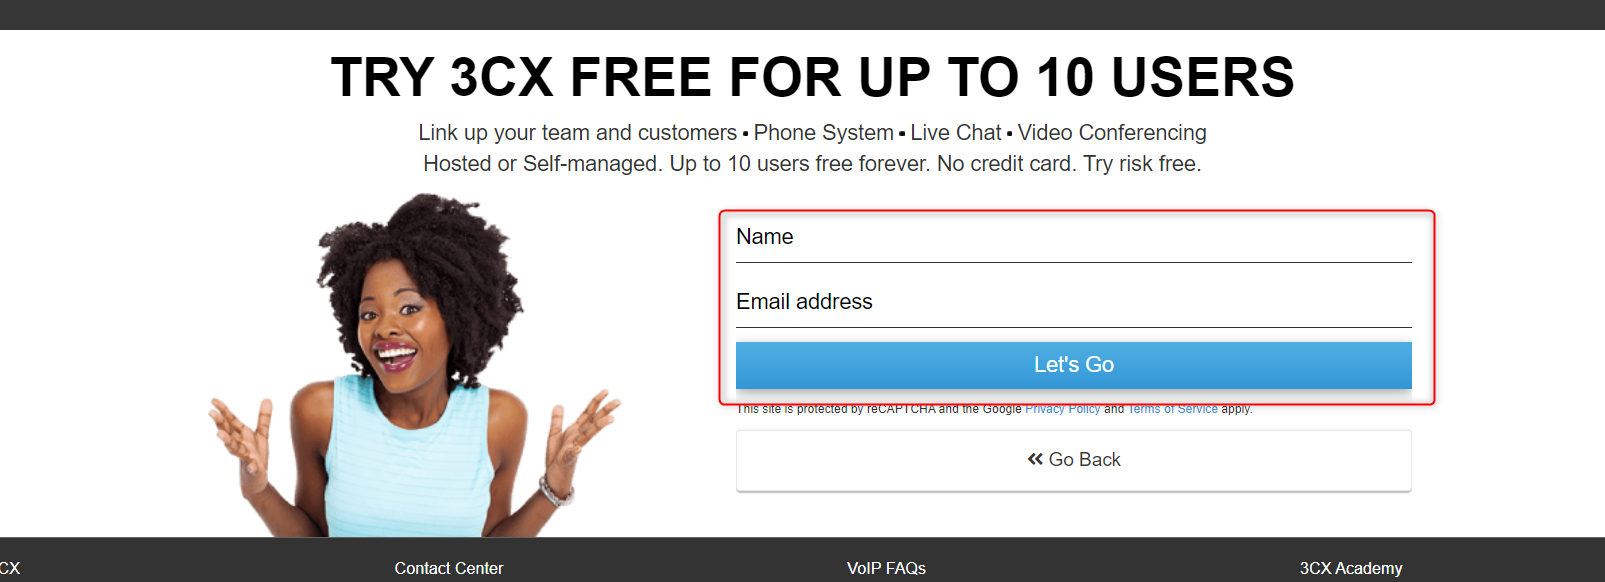 How to install Free Version of 3CX